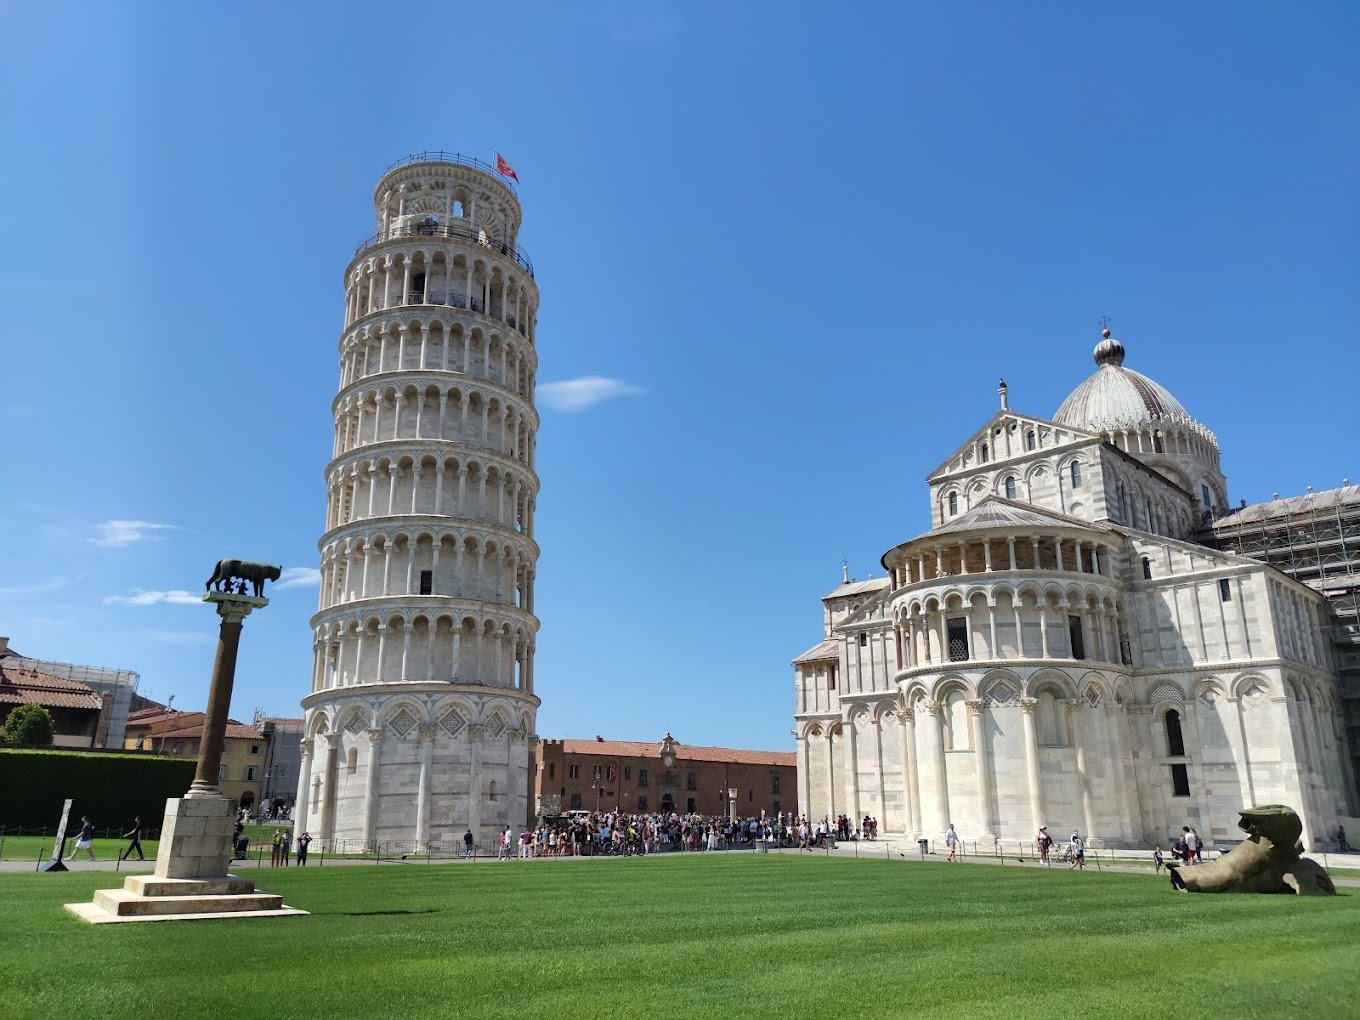 Day 11 Guided walking city tour of Florence. View the remarkable and famous Leaning Tower of Pisa.